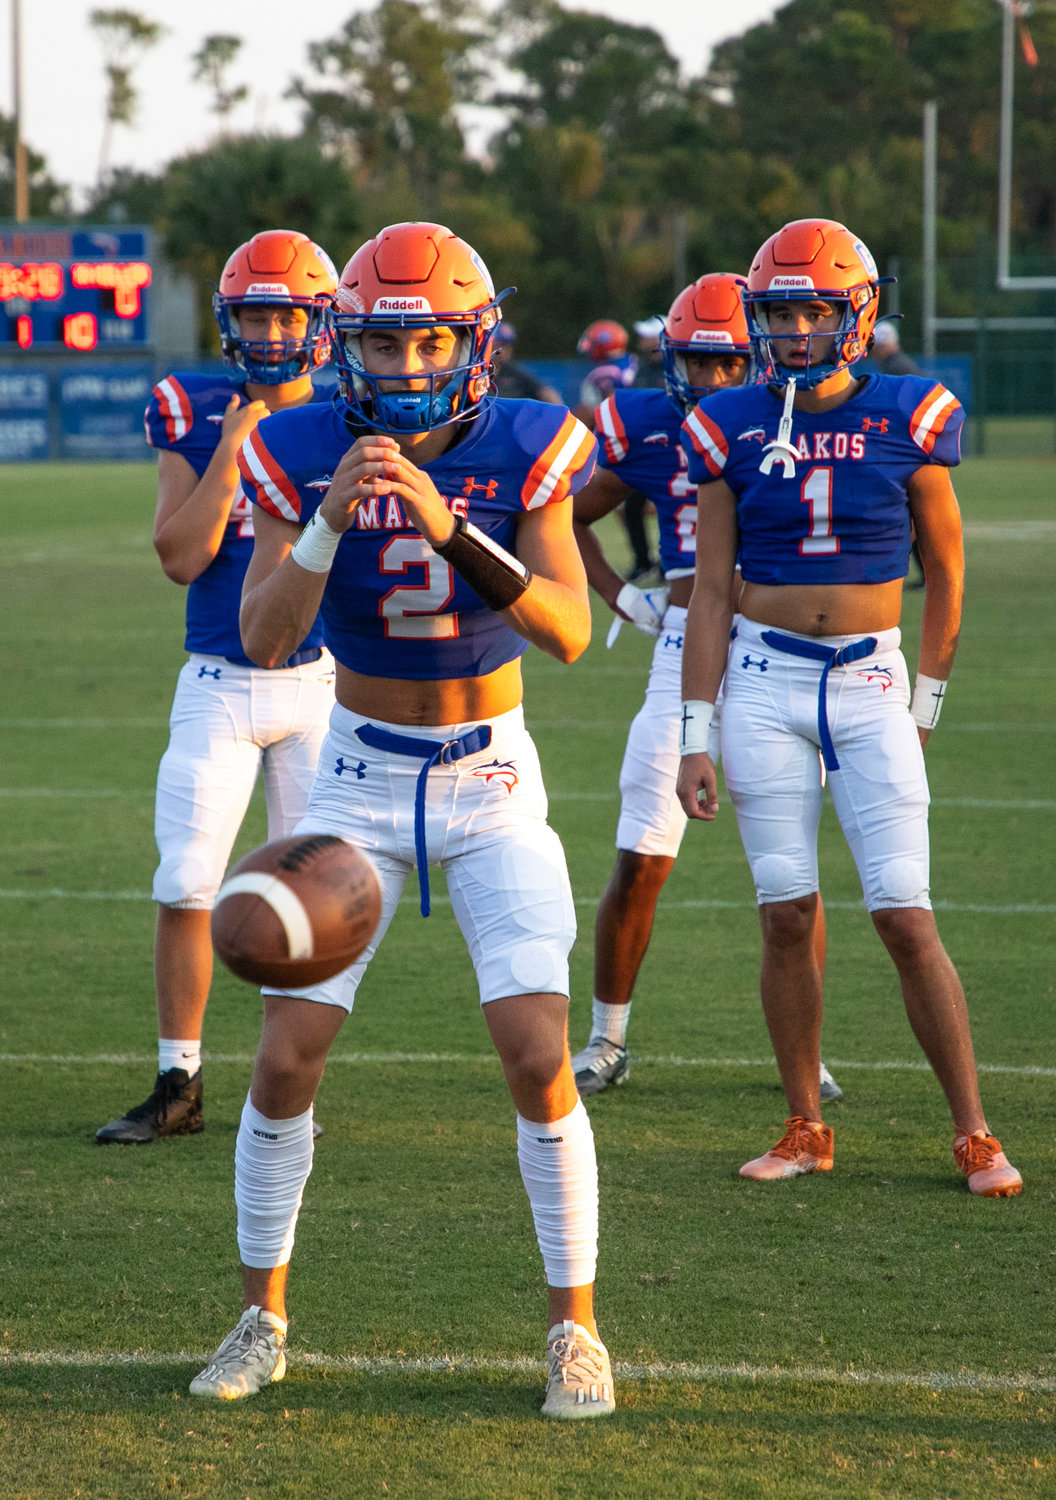 Orange Beach senior Cash Turner receives a snap during a pregame drill before the Makos’ Class 4A Region 1 game against the T.R. Miller Tigers at the Sportsplex Sept. 16. Orange Beach hosts Wilcox Central this Friday in another region battle.